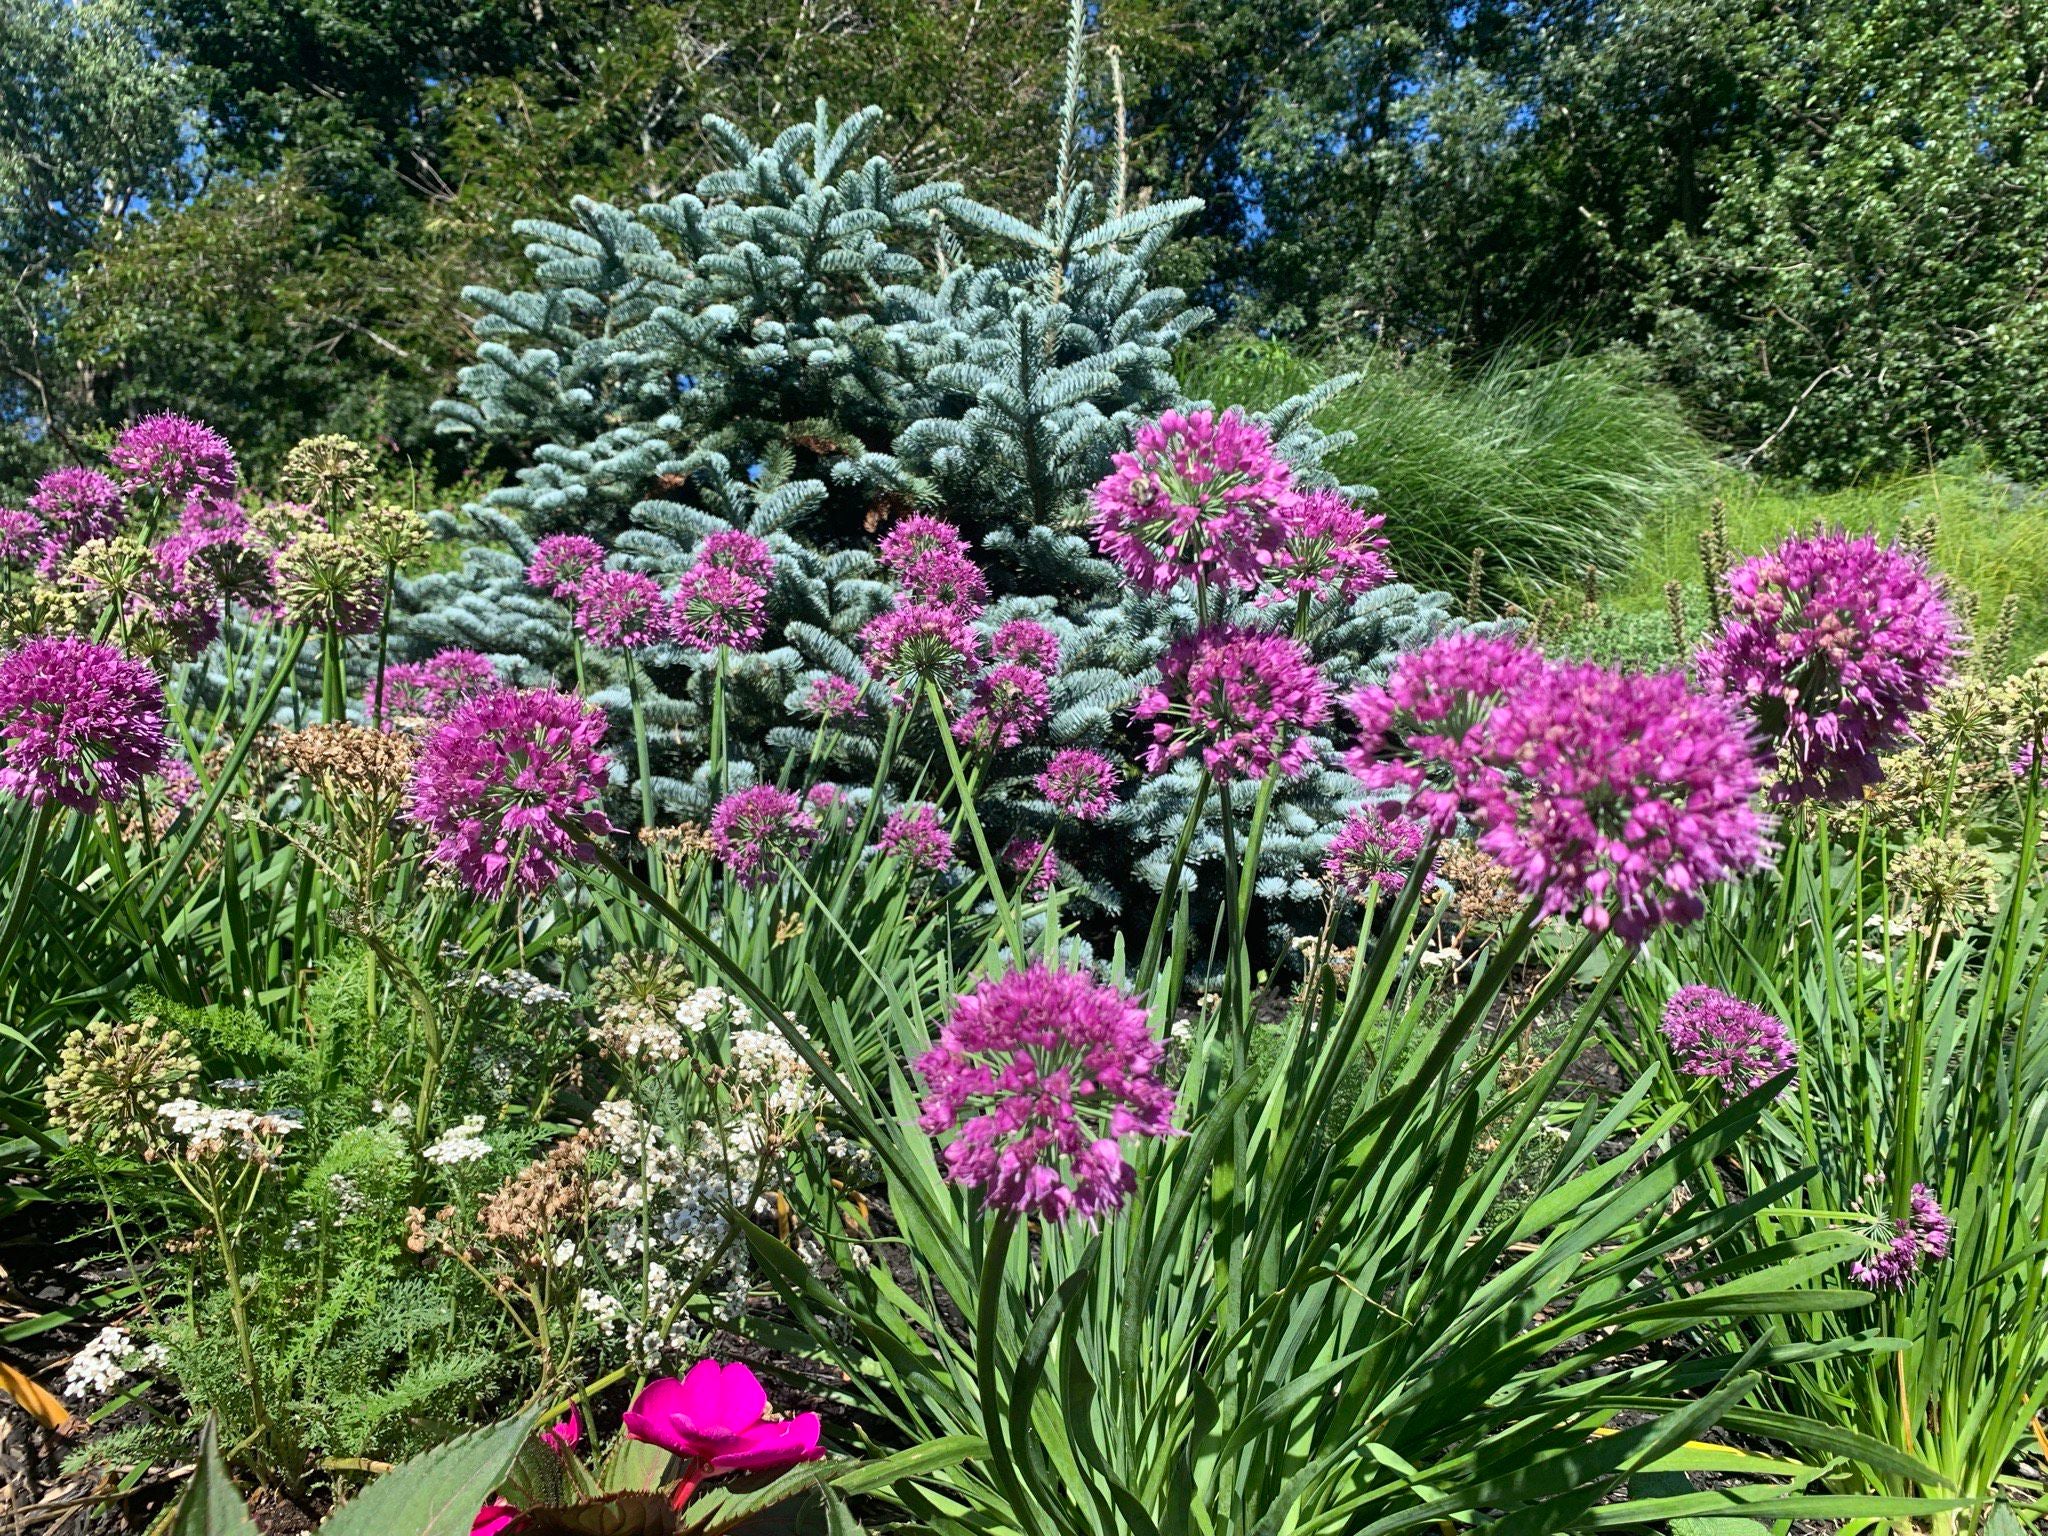 allium plant with purple bursts of flowers that look like fireworks is used to illustrate plants that thrive in Eastern Mass. amid climate change.